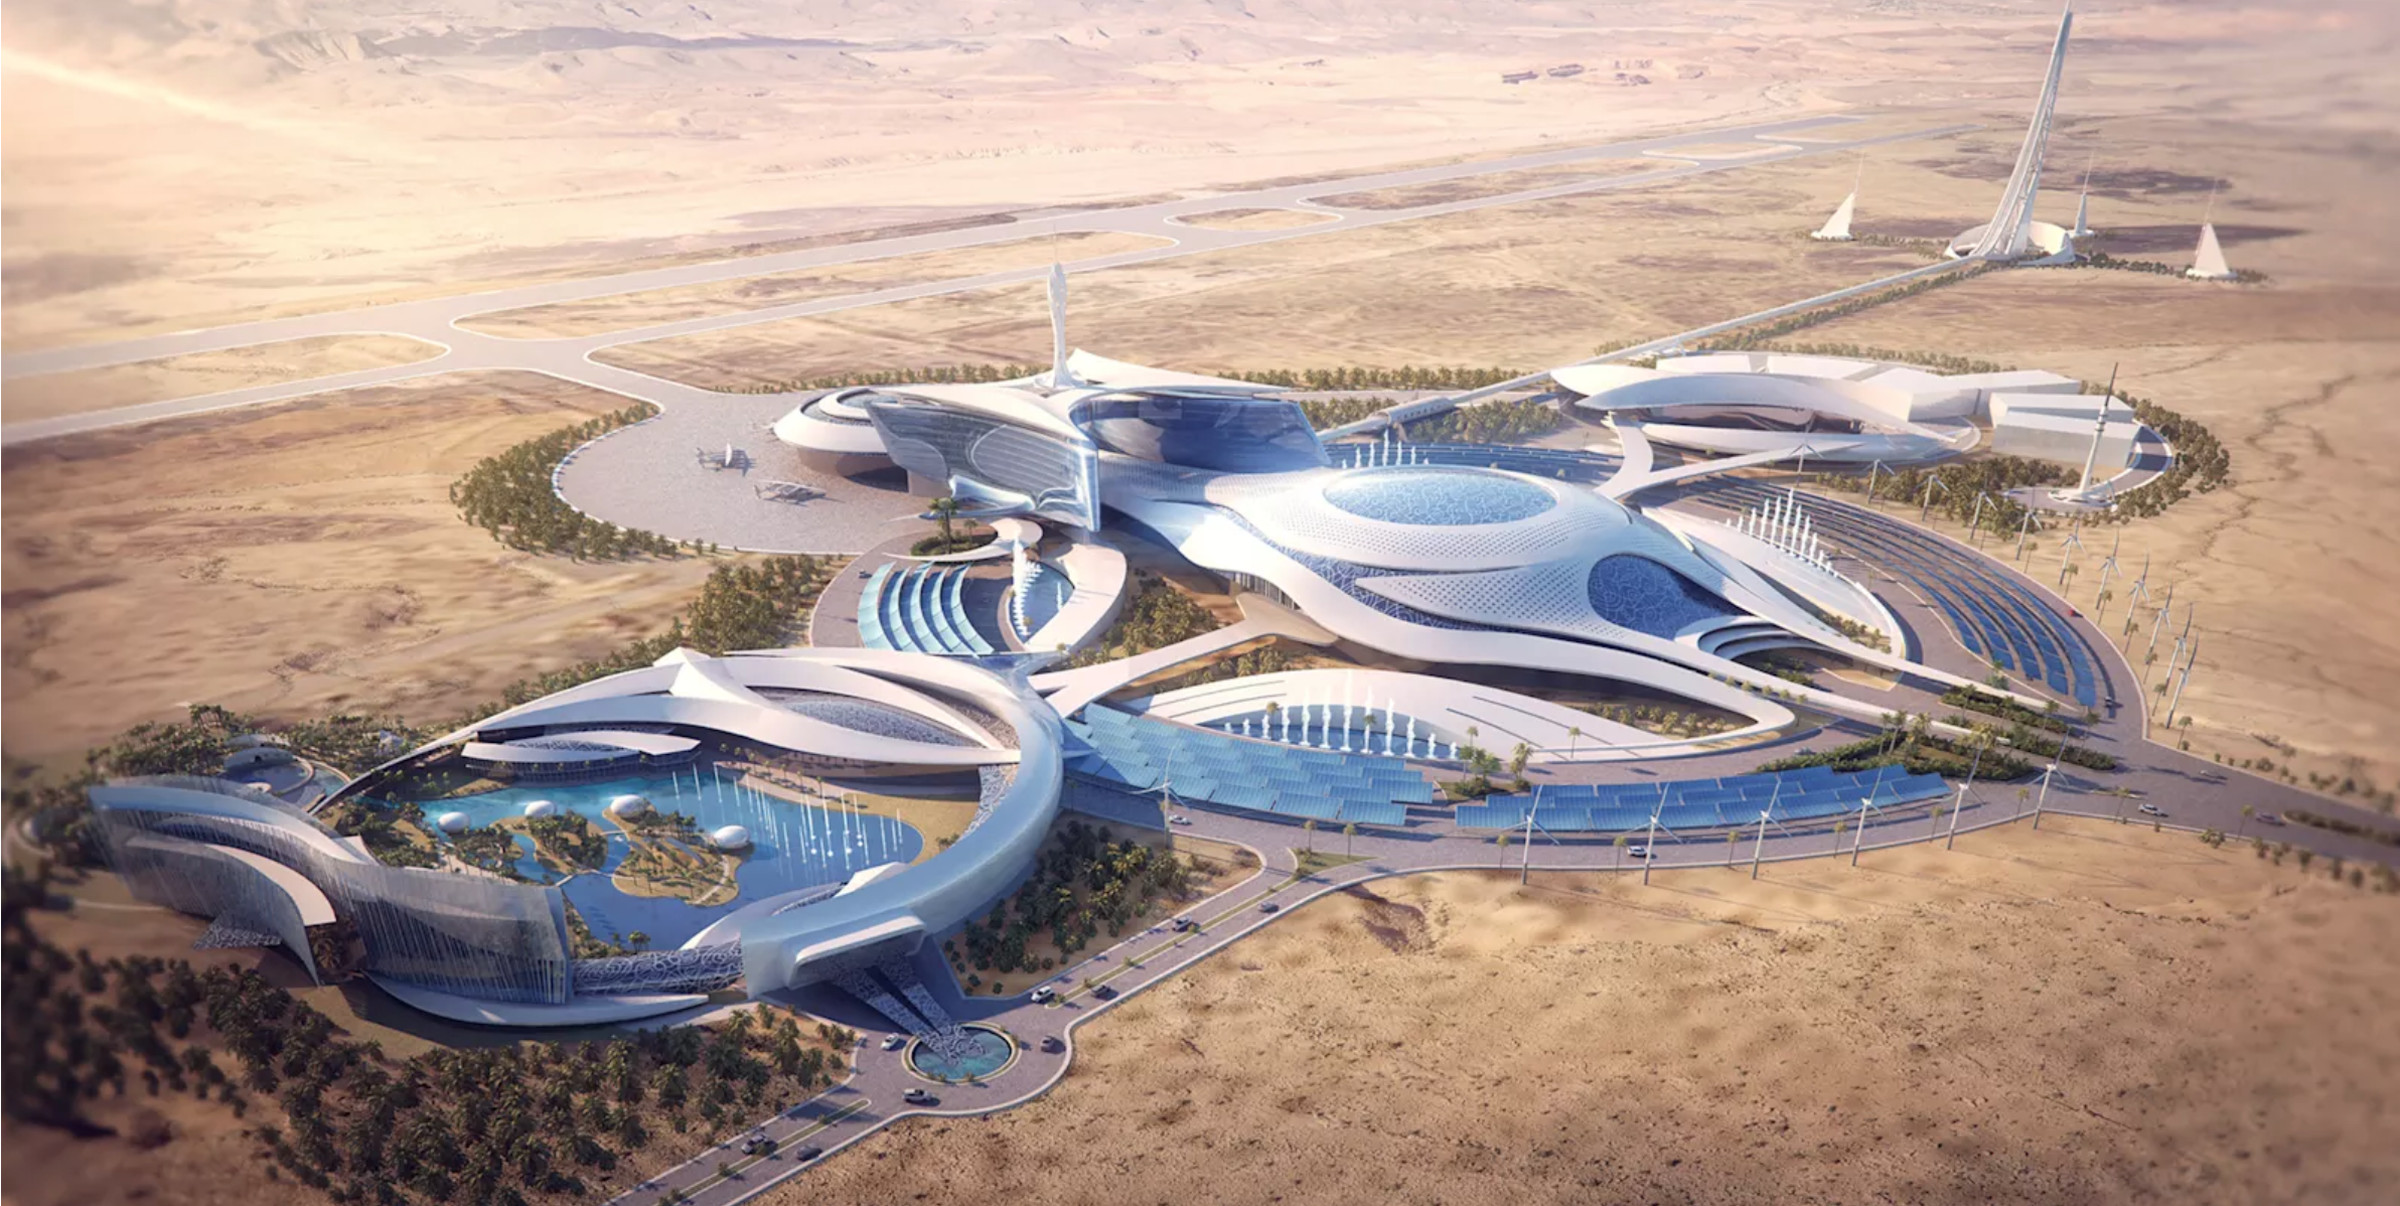 A rendering of a future space-centric entertainment center in Saudi Arabia.